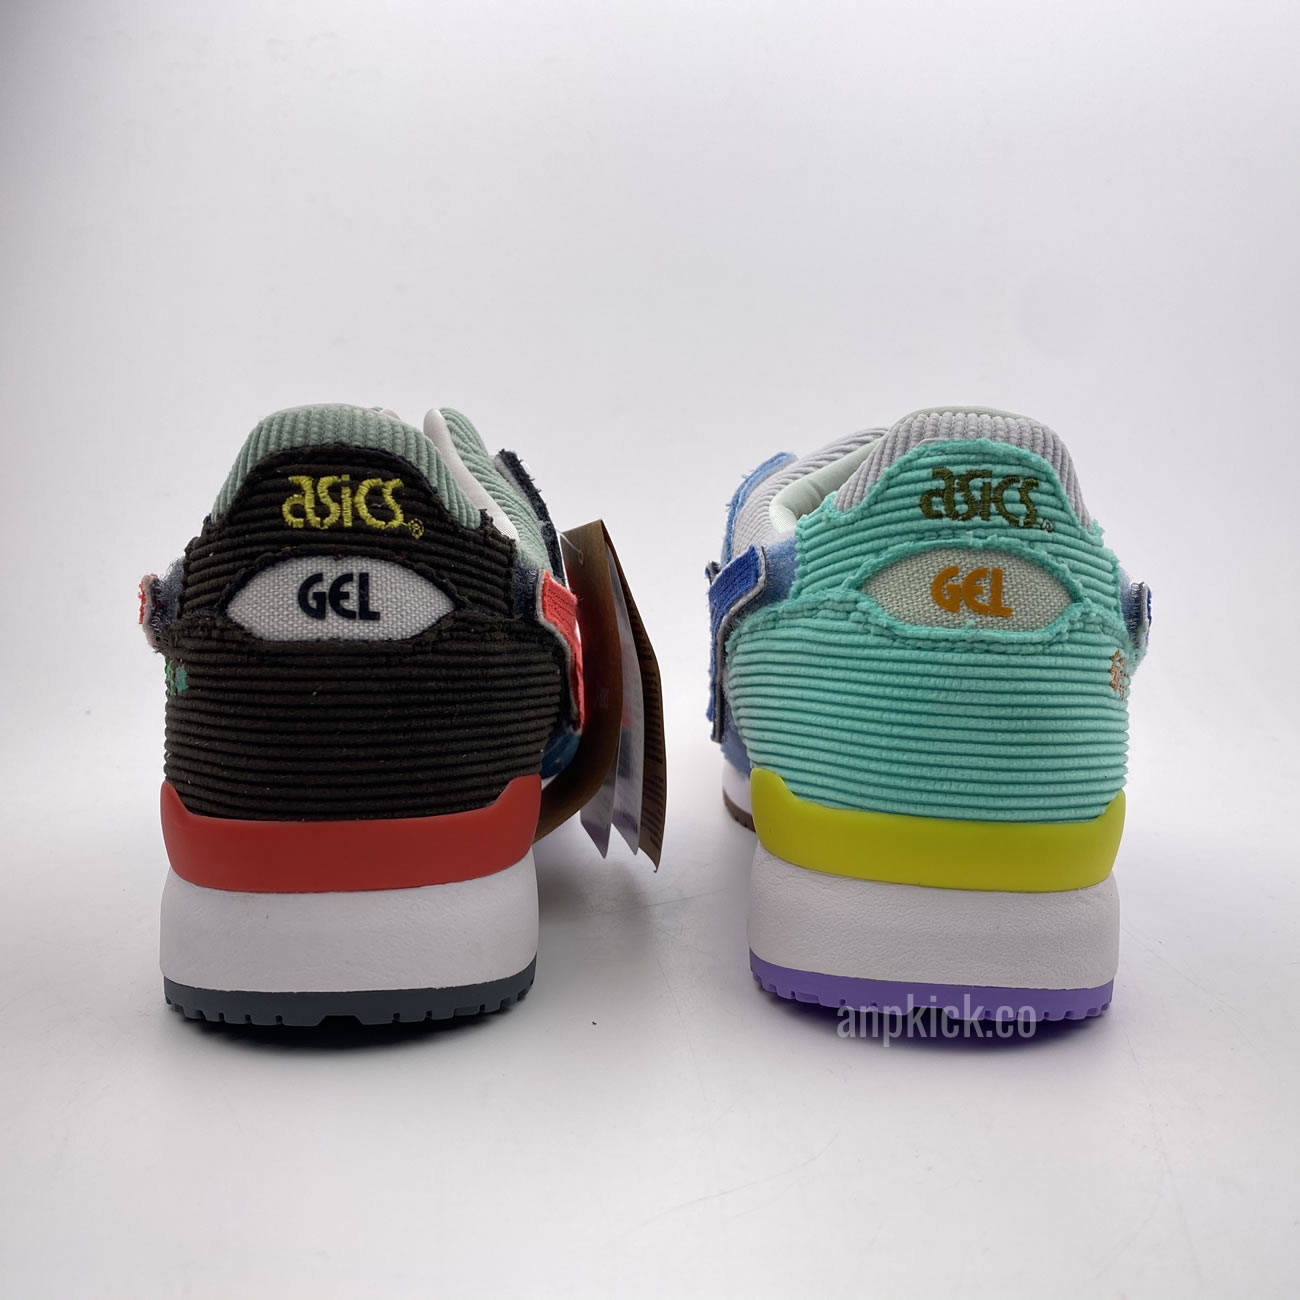 Sean Wotherspoon Atmos Asics Gel Lyte Og Shoes Multi 1203a019 000 (7) - newkick.org